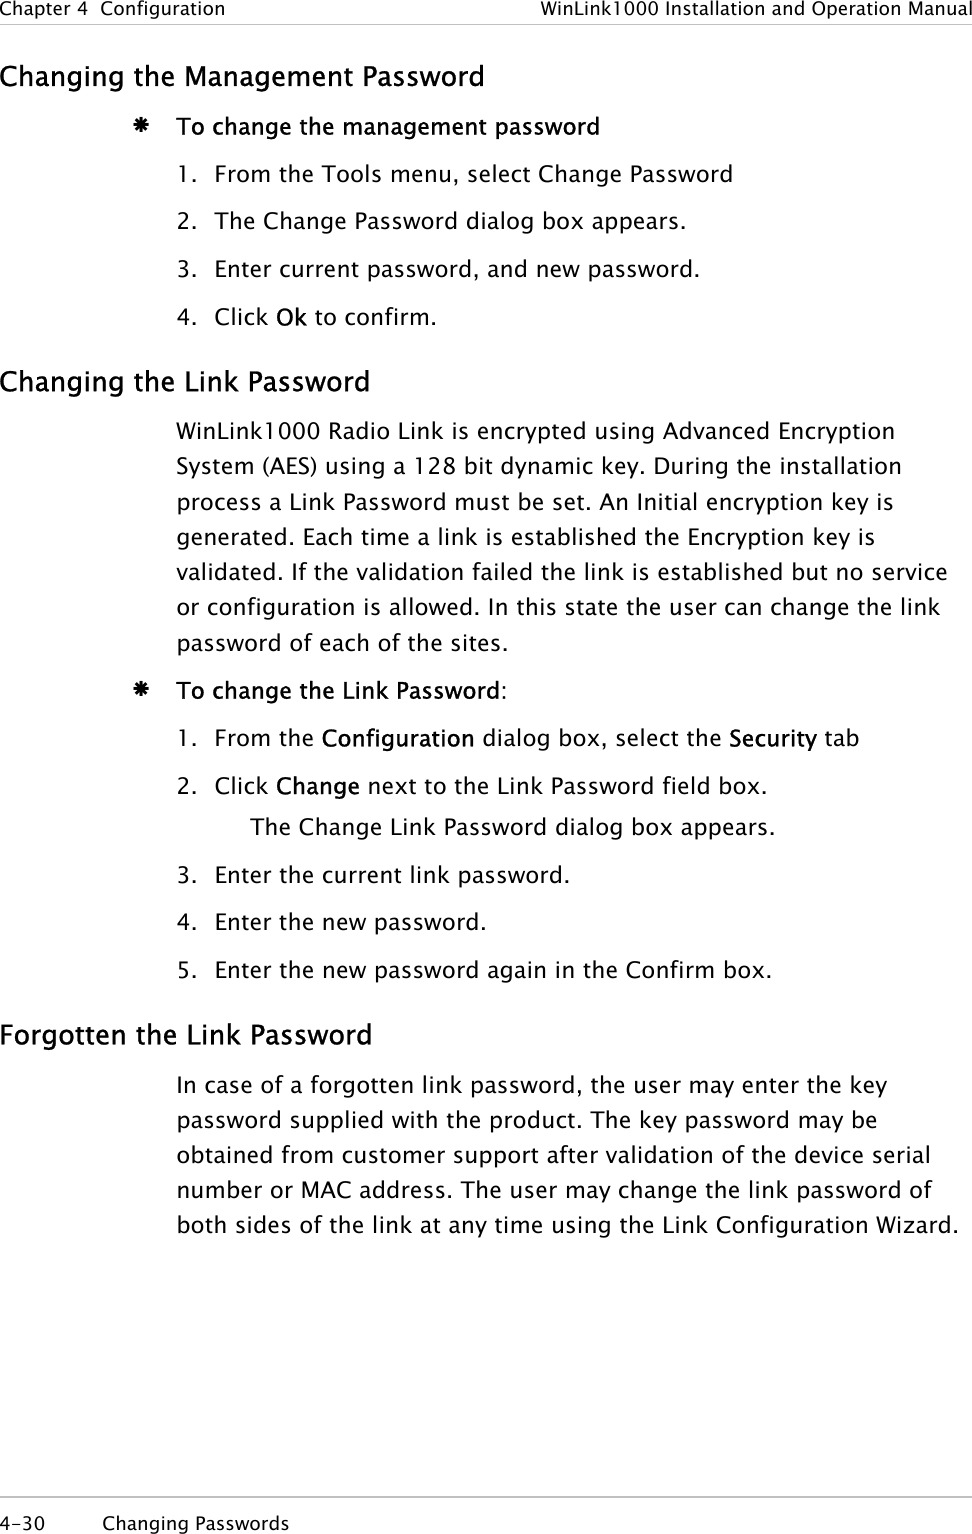 Chapter  4  Configuration  WinLink1000 Installation and Operation Manual Changing the Management Password Æ To change the management password 1. From the Tools menu, select Change Password 2. The Change Password dialog box appears. 3. Enter current password, and new password. 4. Click Ok to confirm. Changing the Link Password WinLink1000 Radio Link is encrypted using Advanced Encryption System (AES) using a 128 bit dynamic key. During the installation process a Link Password must be set. An Initial encryption key is generated. Each time a link is established the Encryption key is validated. If the validation failed the link is established but no service or configuration is allowed. In this state the user can change the link password of each of the sites.  Æ To change the Link Password: 1. From the Configuration dialog box, select the Security tab 2. Click Change next to the Link Password field box. The Change Link Password dialog box appears. 3. Enter the current link password. 4. Enter the new password. 5. Enter the new password again in the Confirm box. Forgotten the Link Password In case of a forgotten link password, the user may enter the key password supplied with the product. The key password may be obtained from customer support after validation of the device serial number or MAC address. The user may change the link password of both sides of the link at any time using the Link Configuration Wizard.  4-30 Changing Passwords  